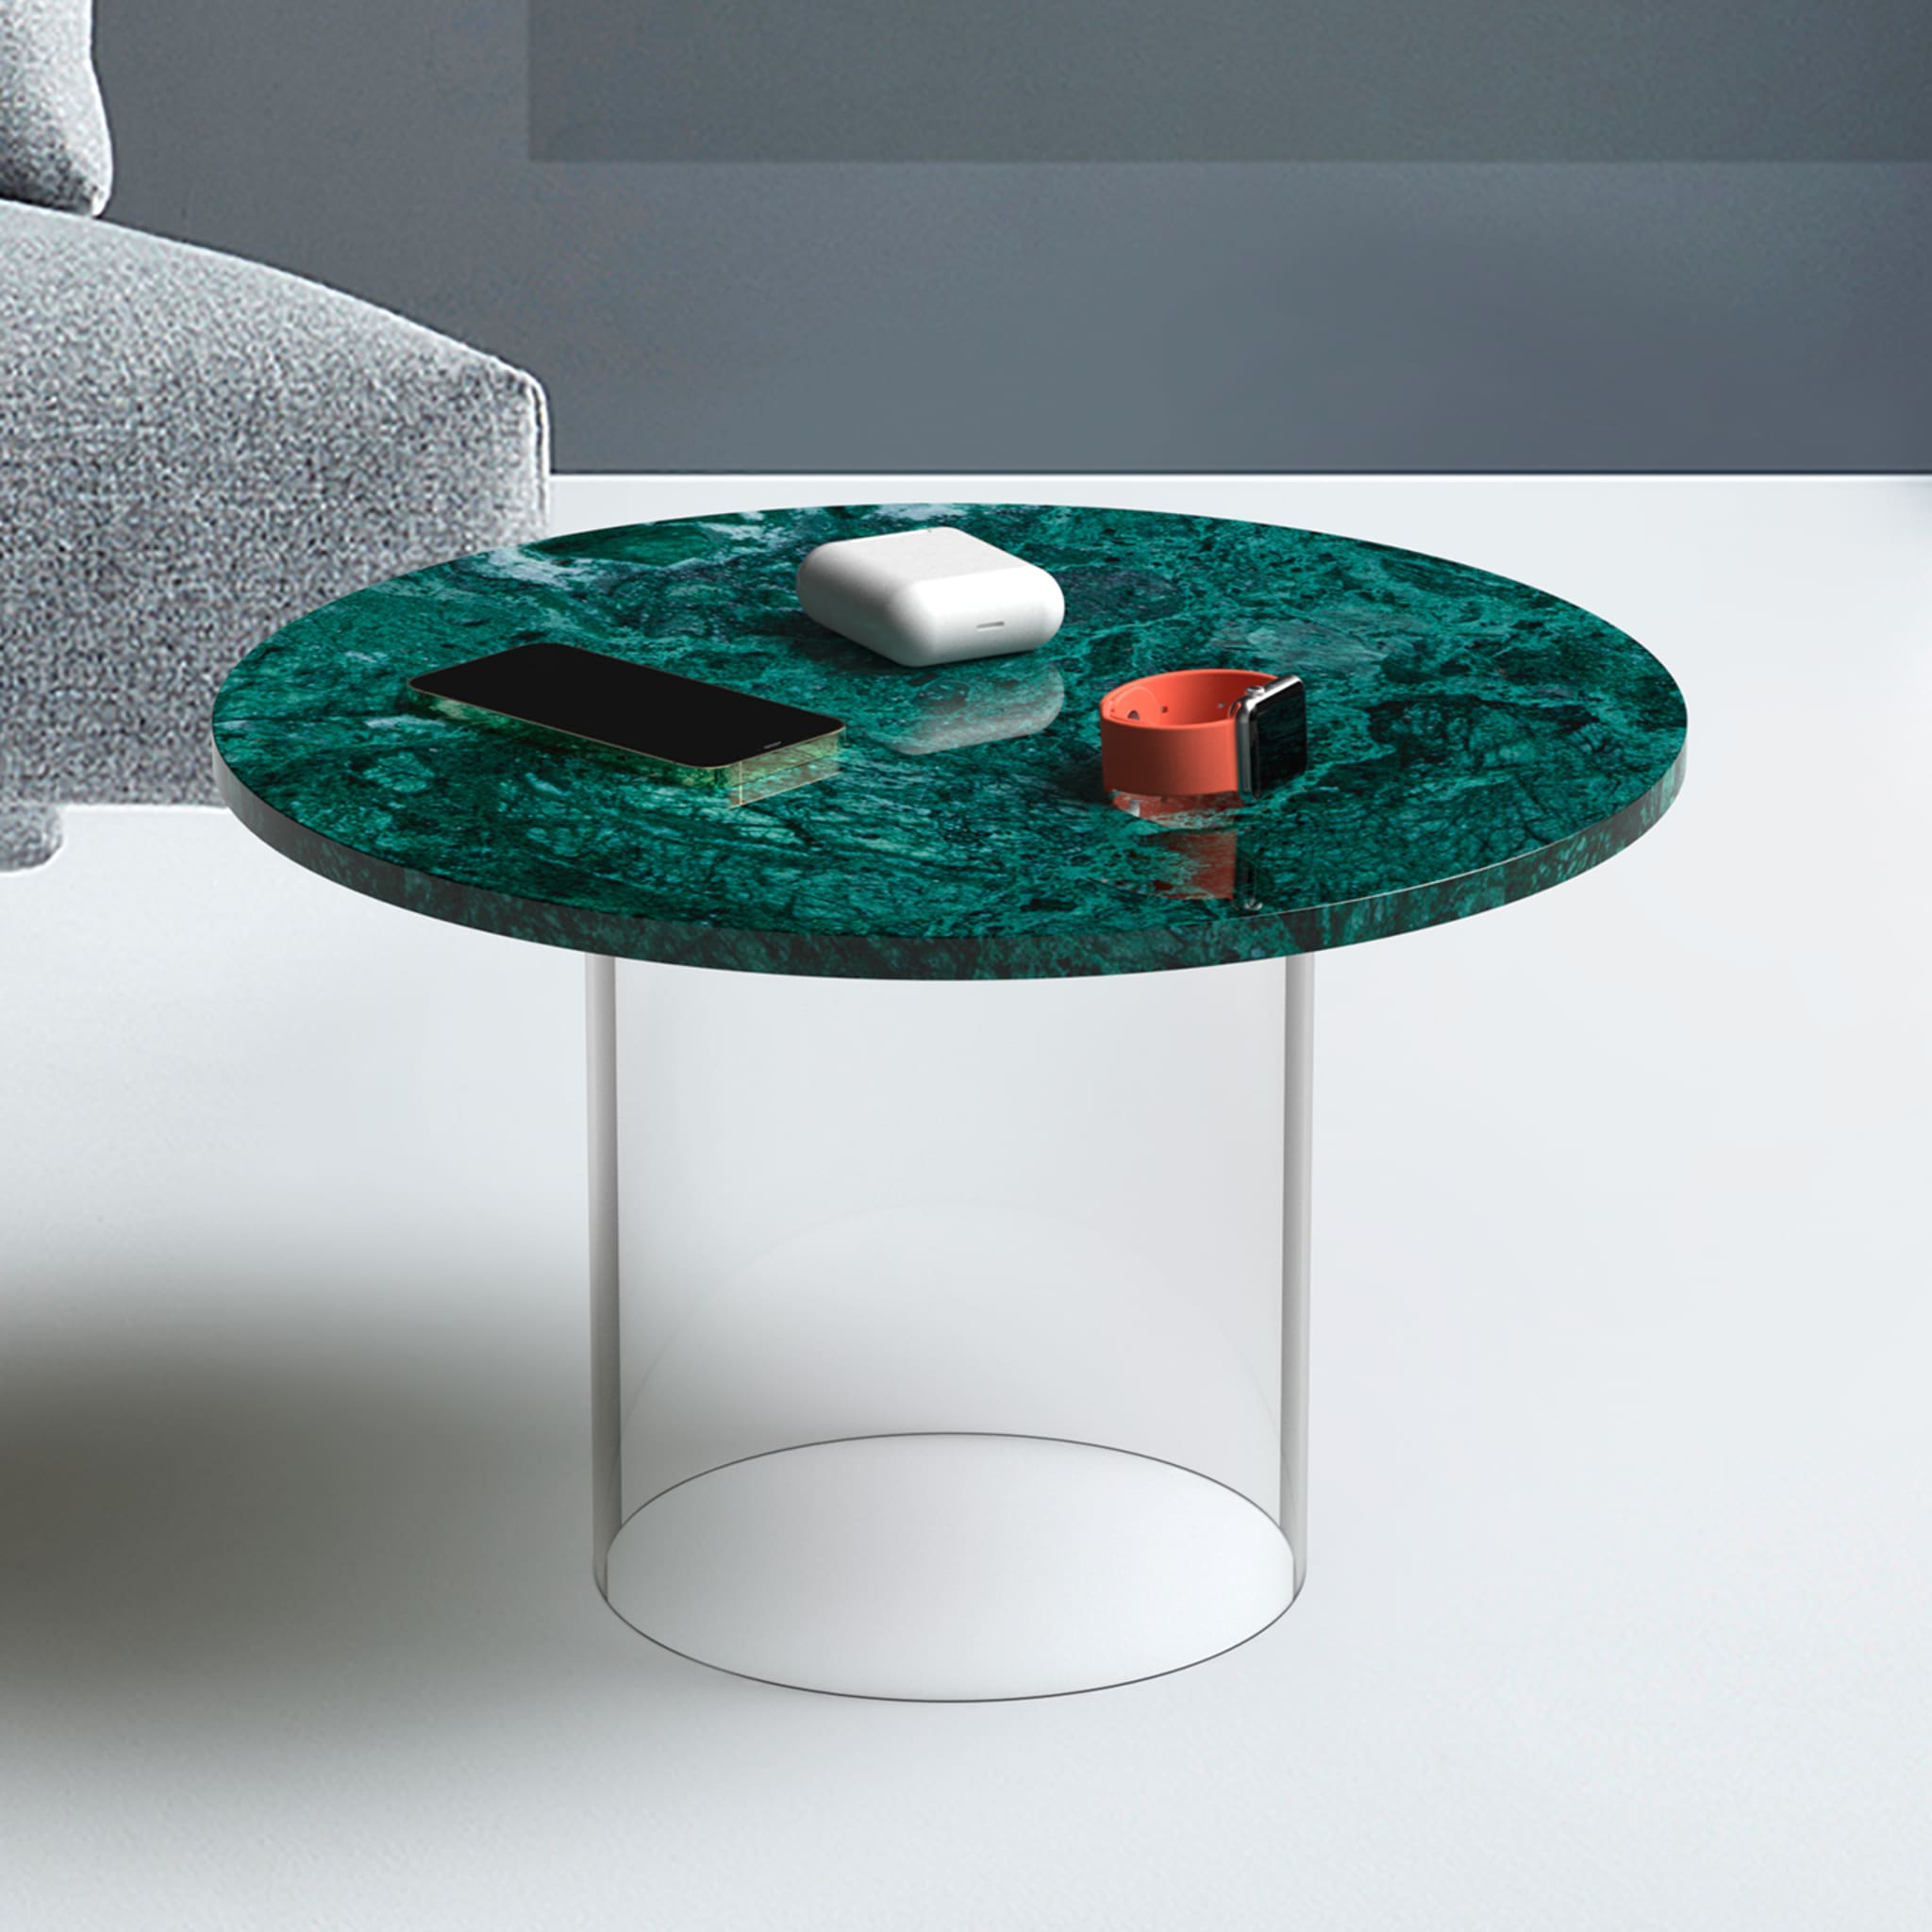 21st Century Guatemala Marble Coffee Table with Wireless Charger - Alternative view 3